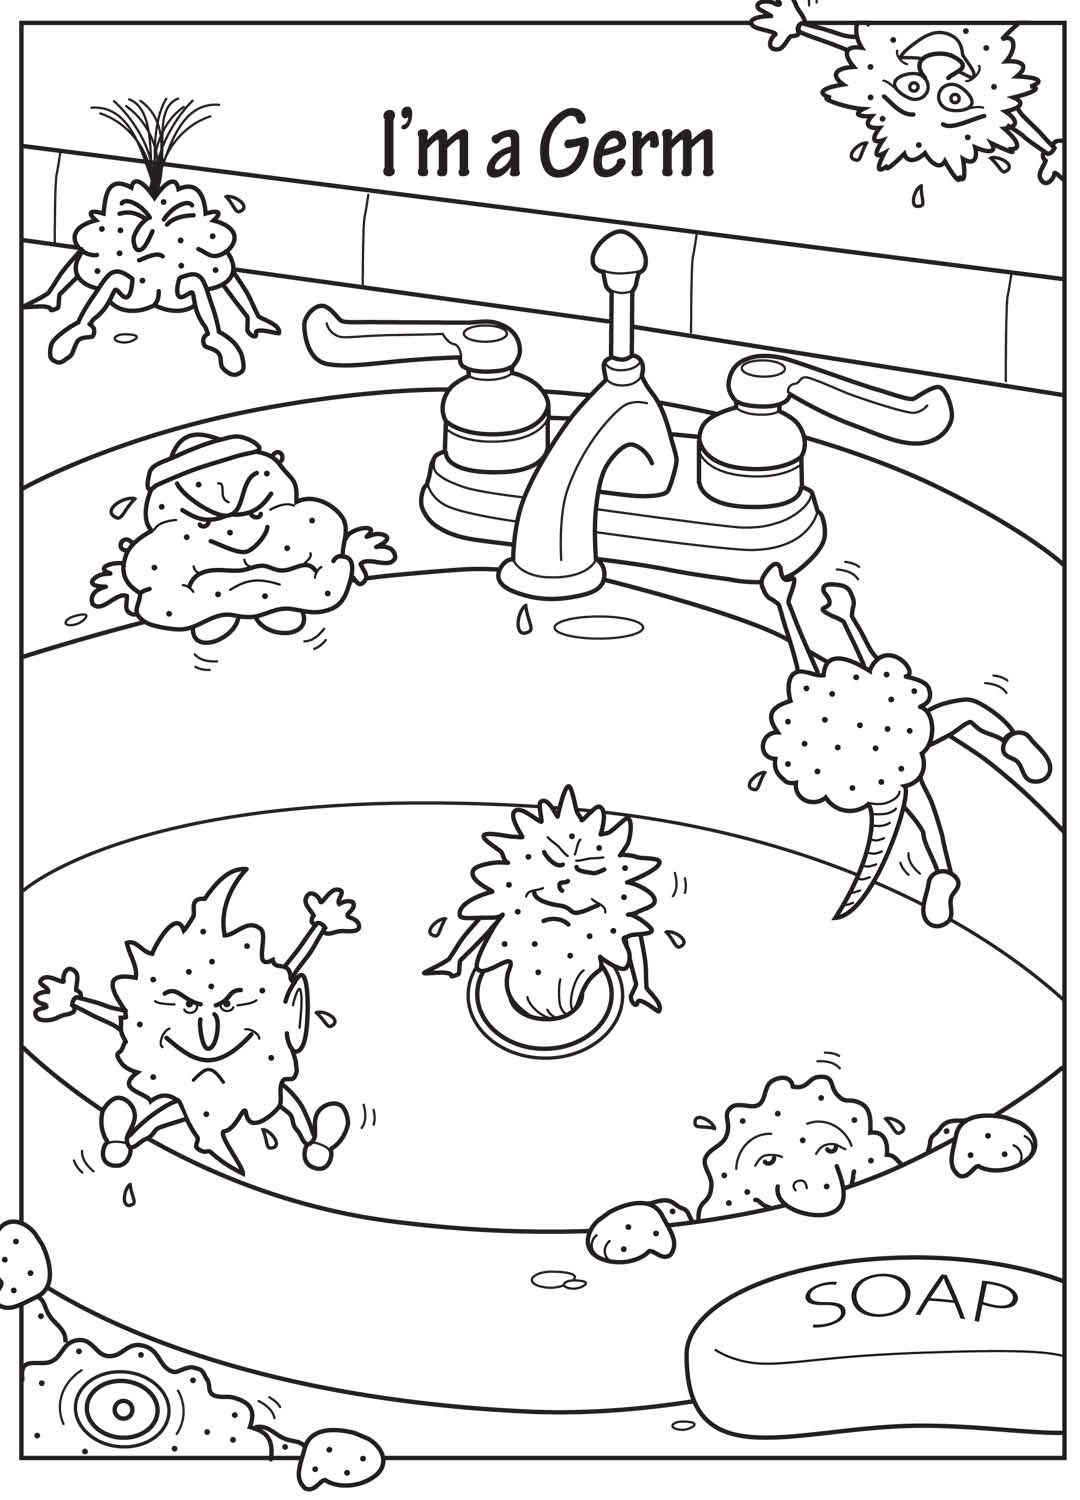 Germs coloring #7, Download drawings